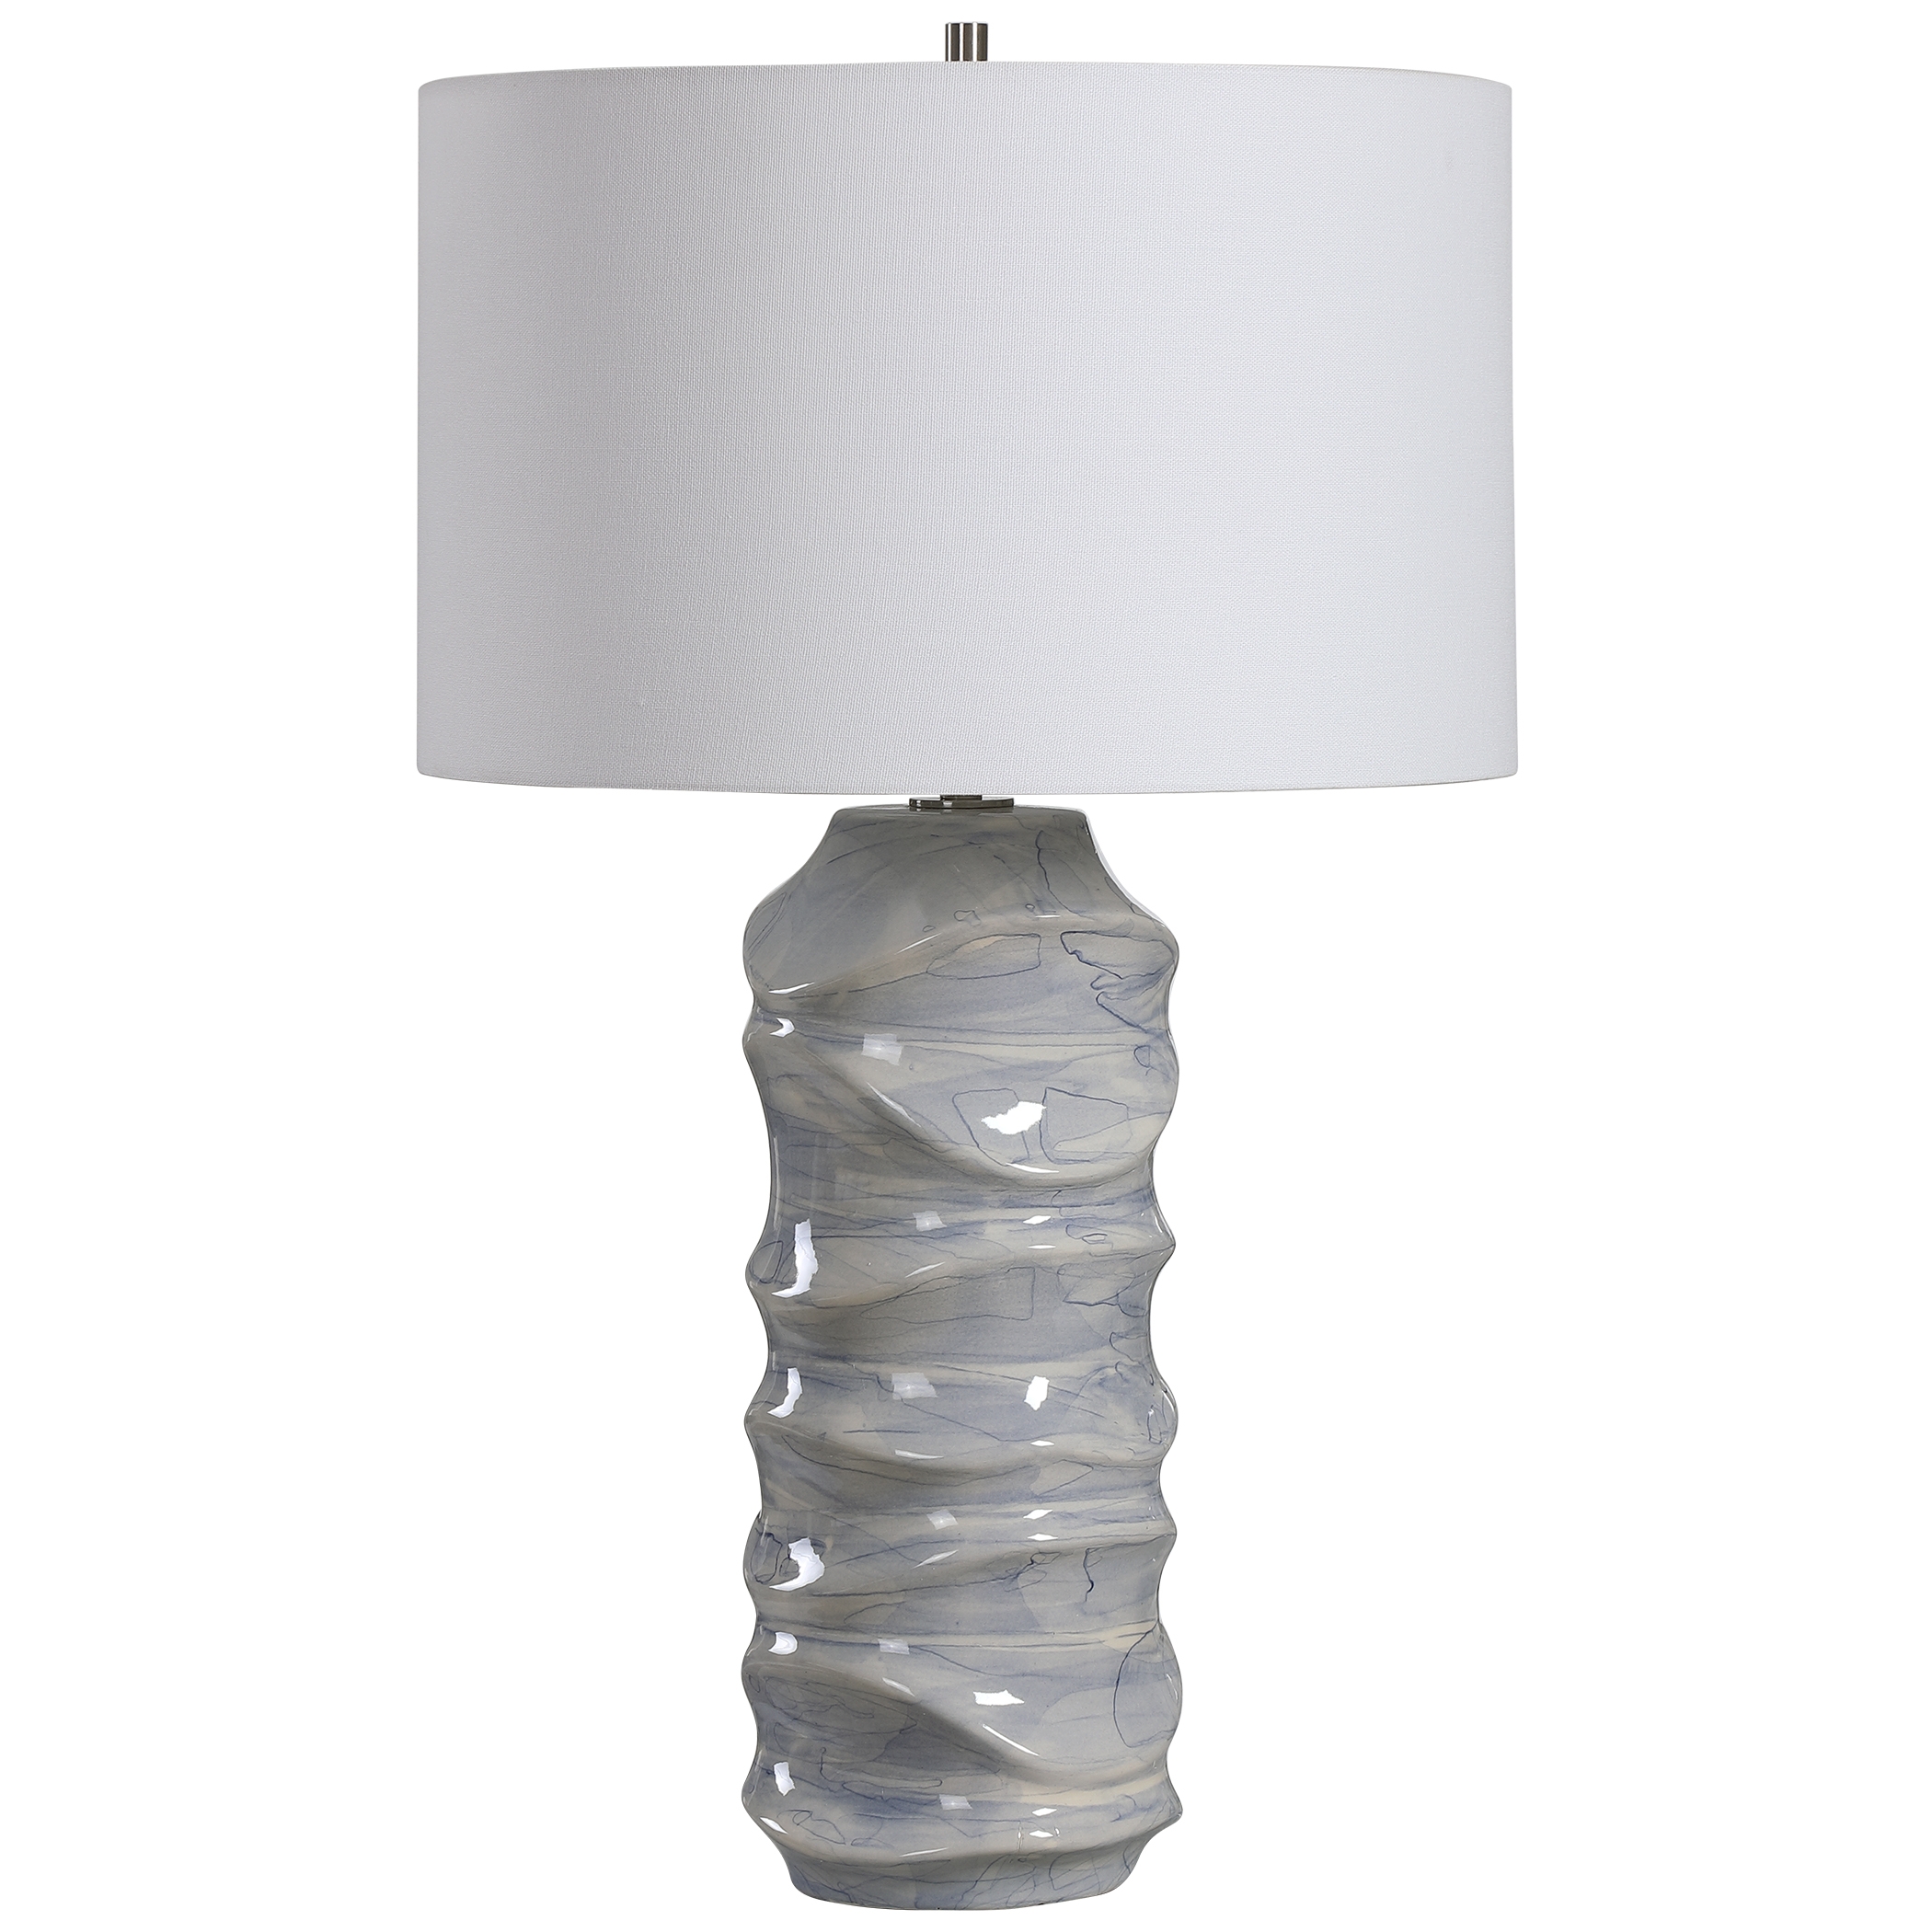 Waves Blue & White Table Lamp - Image 3